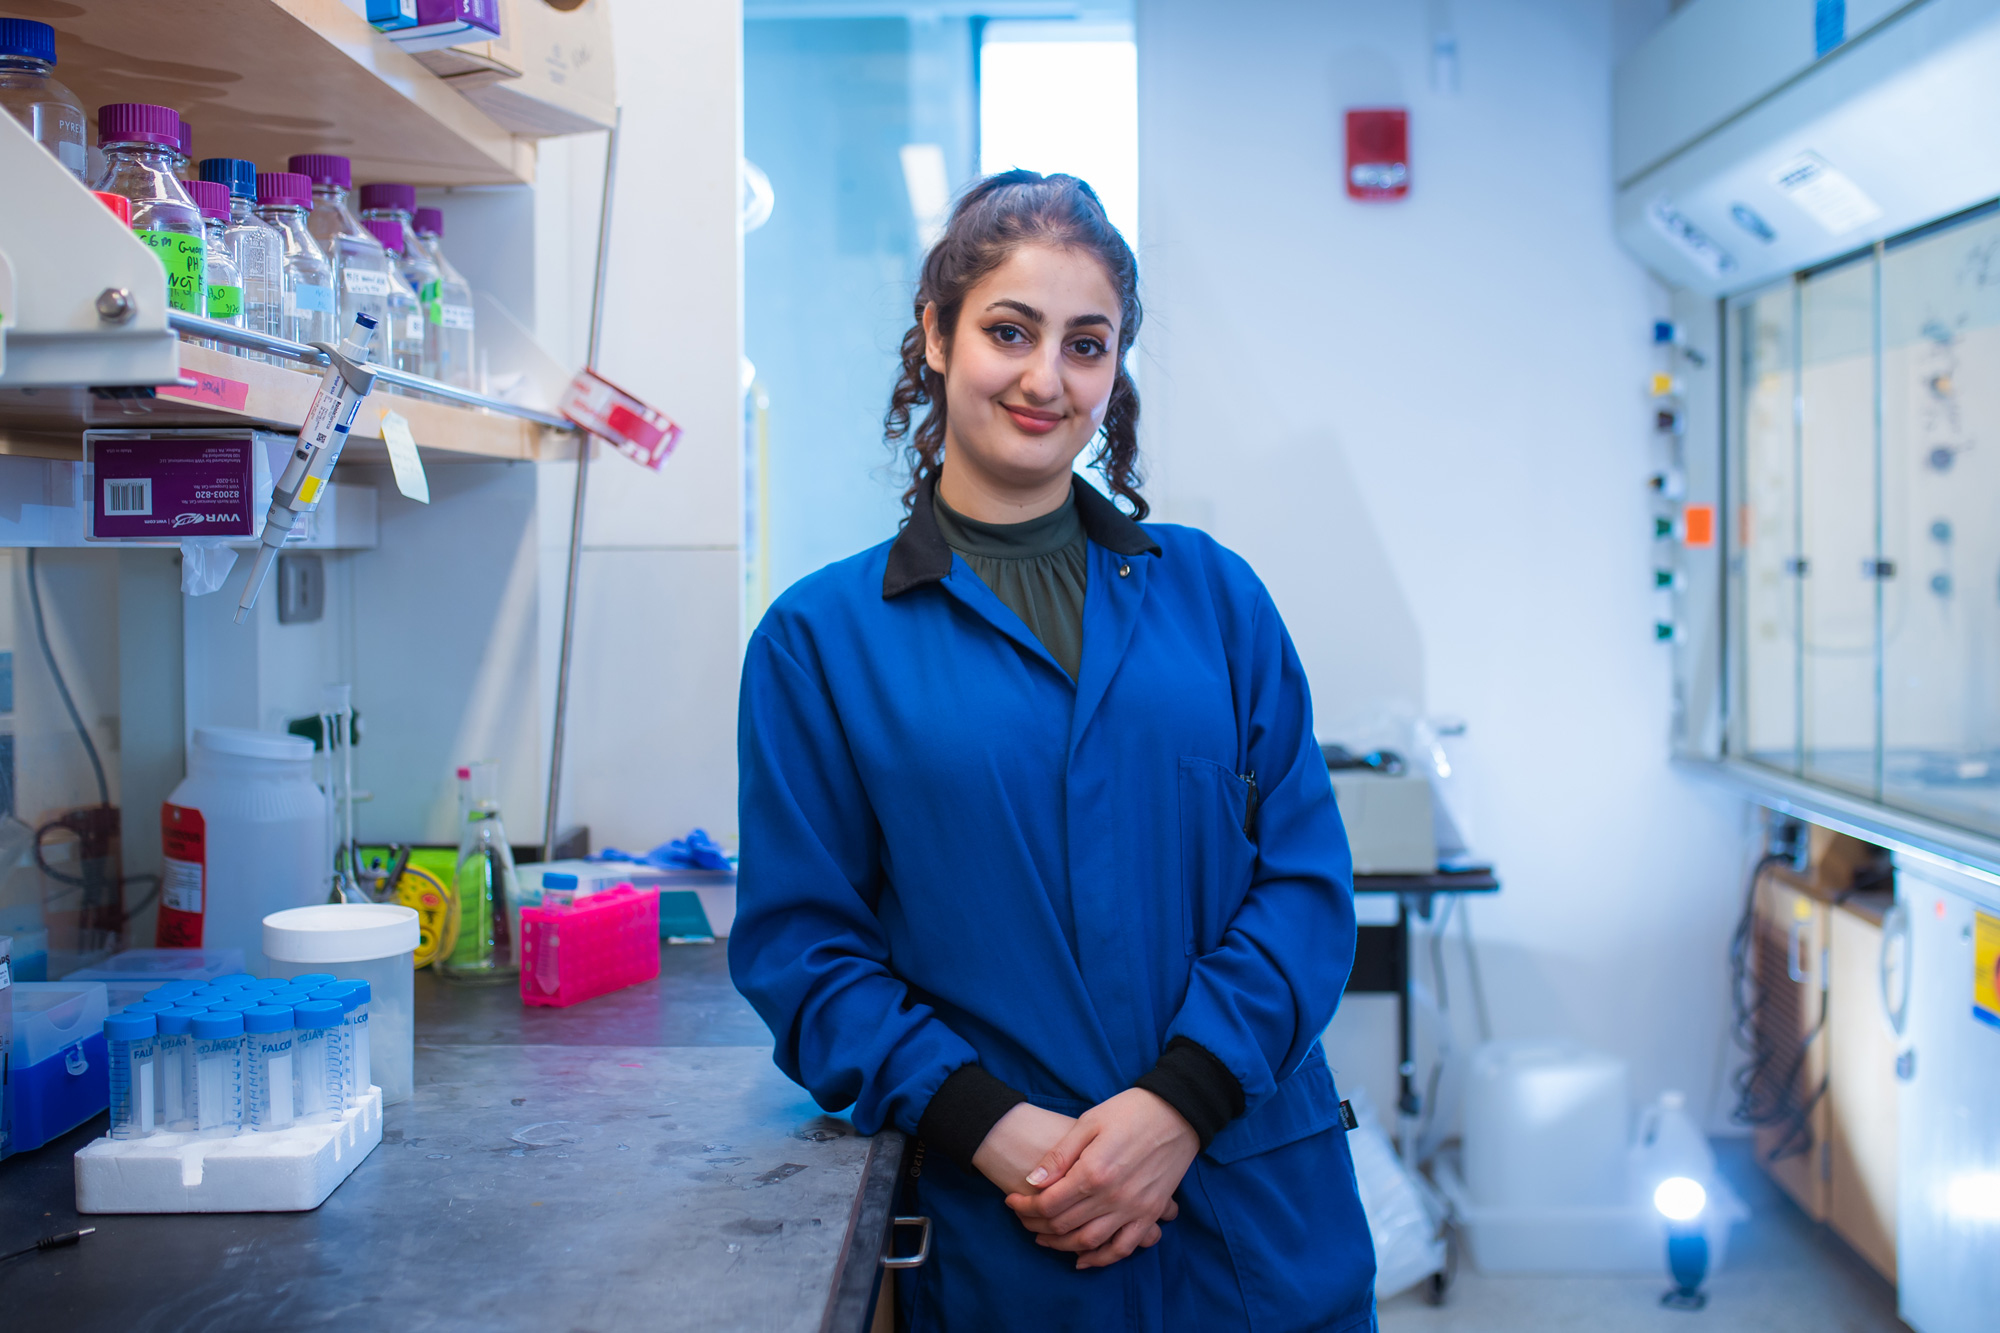 “Growing up in Iran, I never imagined I would have the opportunity to go to a world-renowned university such as MIT,” Azin Saebi says.